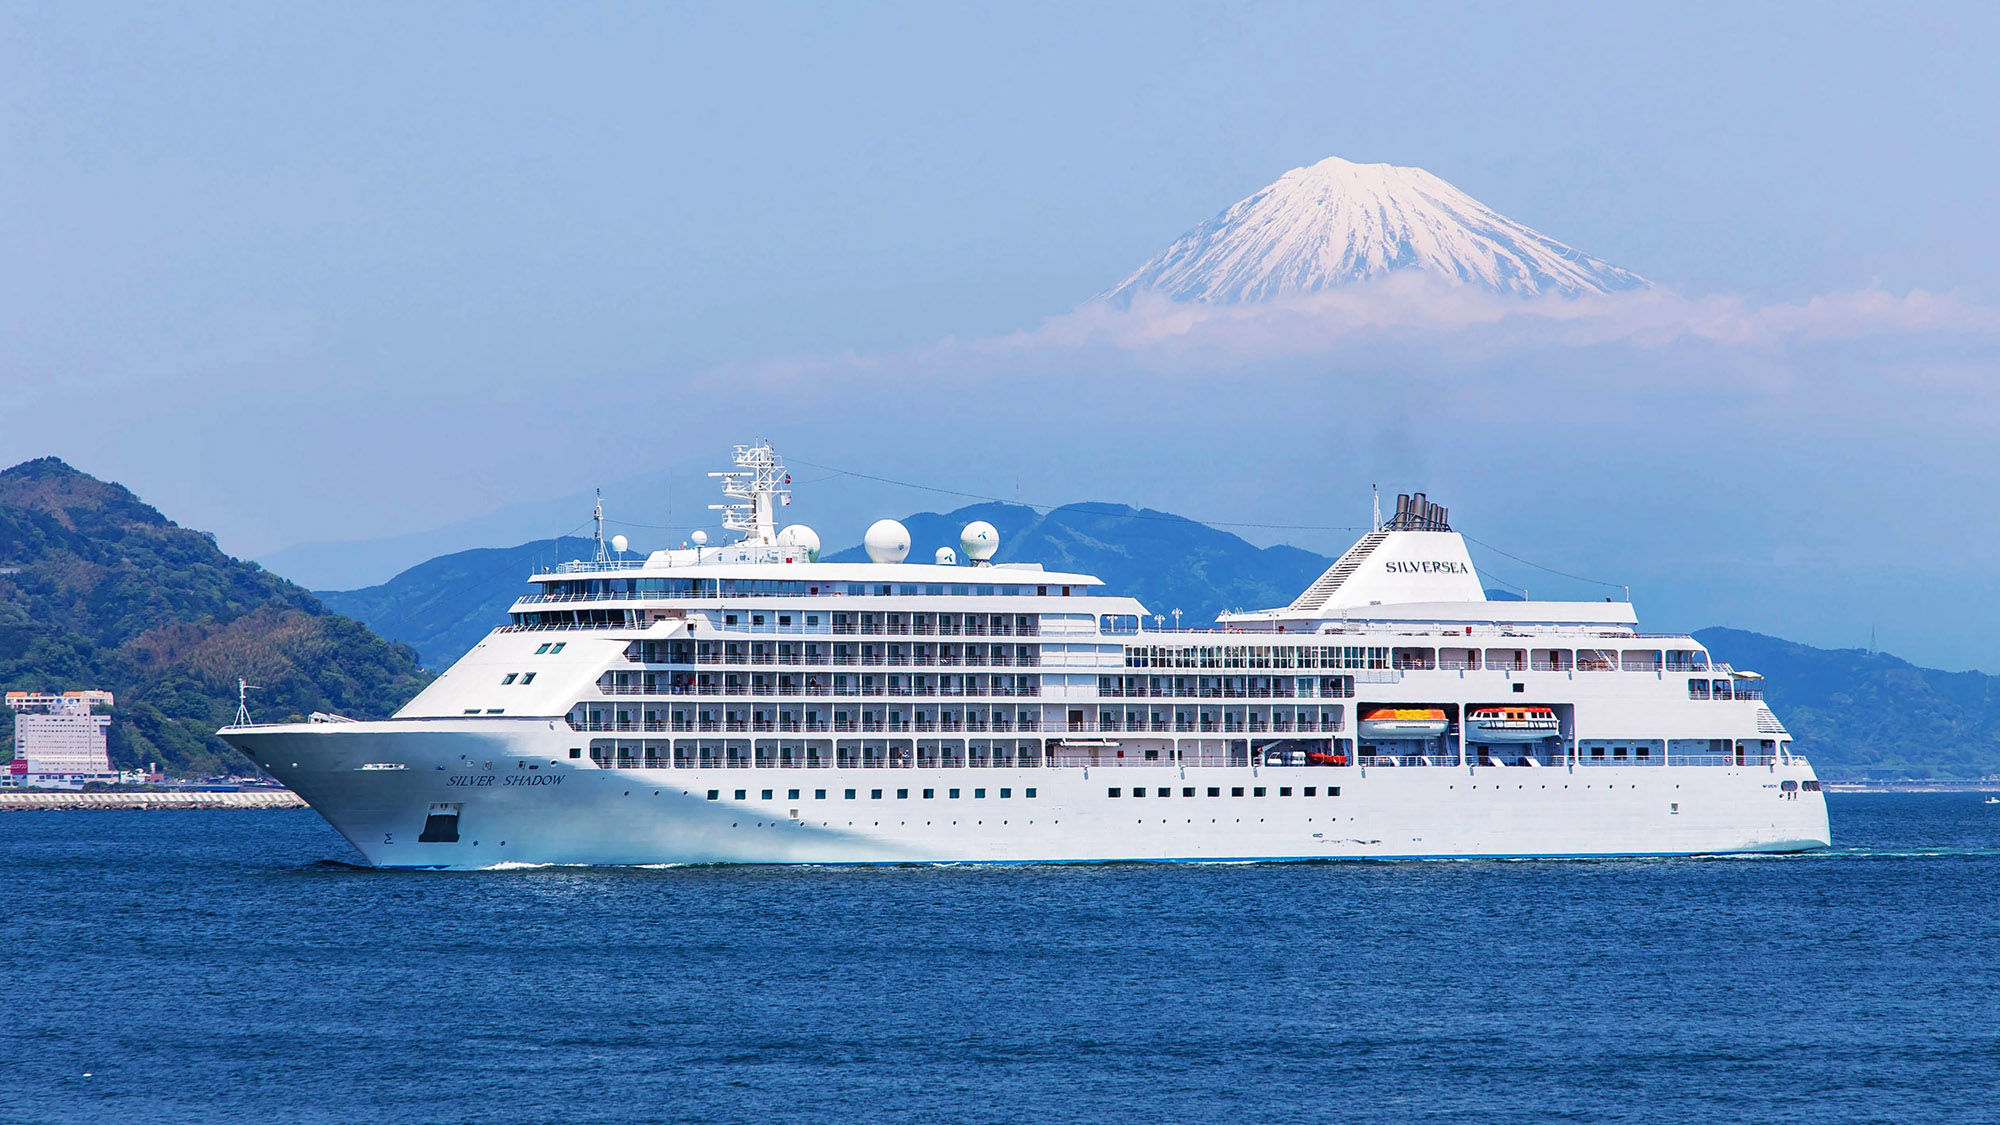 Silversea's Silver Shadow, in Shimizu Port, Japan. The ship is one of four Silversea will deploy in Asia beginning in December.